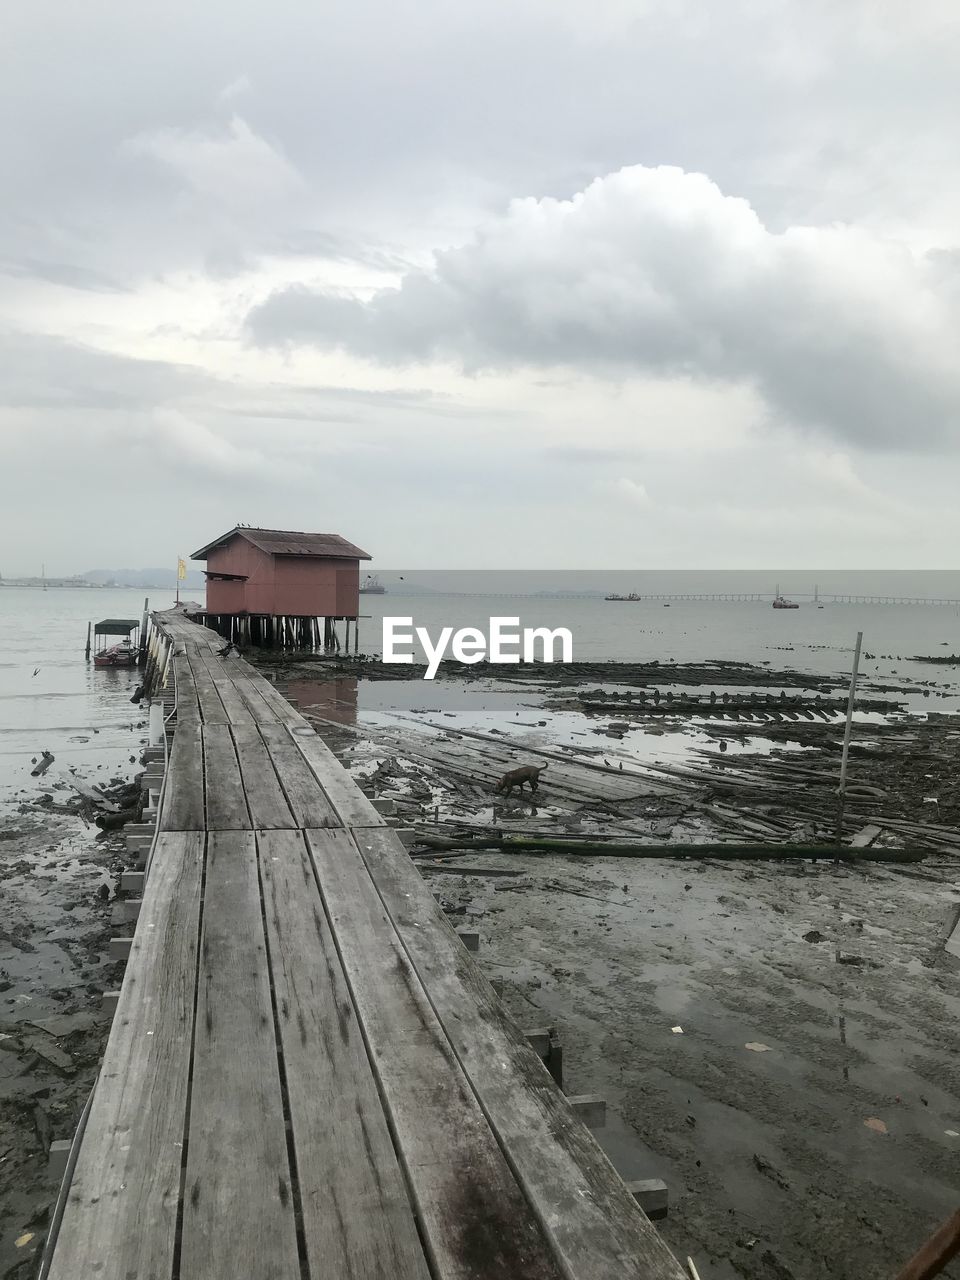 water, sky, sea, cloud, pier, coast, beach, wood, architecture, nature, land, shore, built structure, ocean, scenics - nature, beauty in nature, hut, tranquility, no people, building exterior, day, horizon, horizon over water, boardwalk, tranquil scene, jetty, travel destinations, outdoors, travel, holiday, walkway, building, transportation, environment, sand, non-urban scene, vacation, coastline, tourism, trip, overcast, nautical vessel